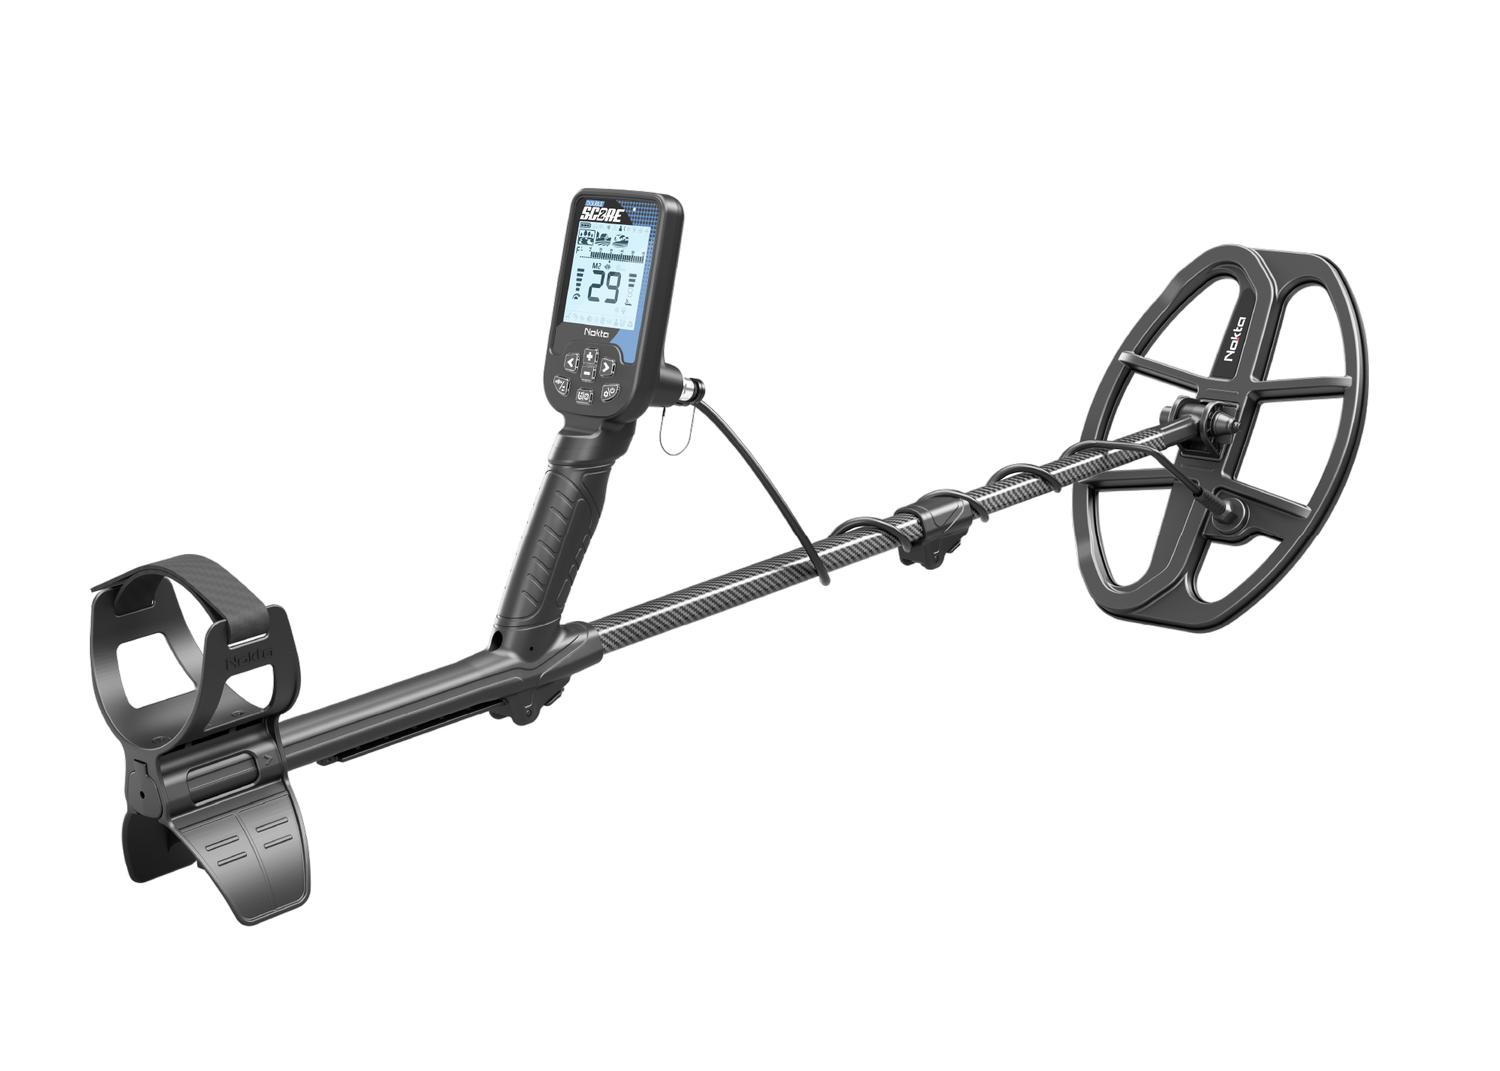 DOUBLE SCORE MULTI-FREQUENCY WATERPROOF METAL DETECTOR WITH 12X9 COIL